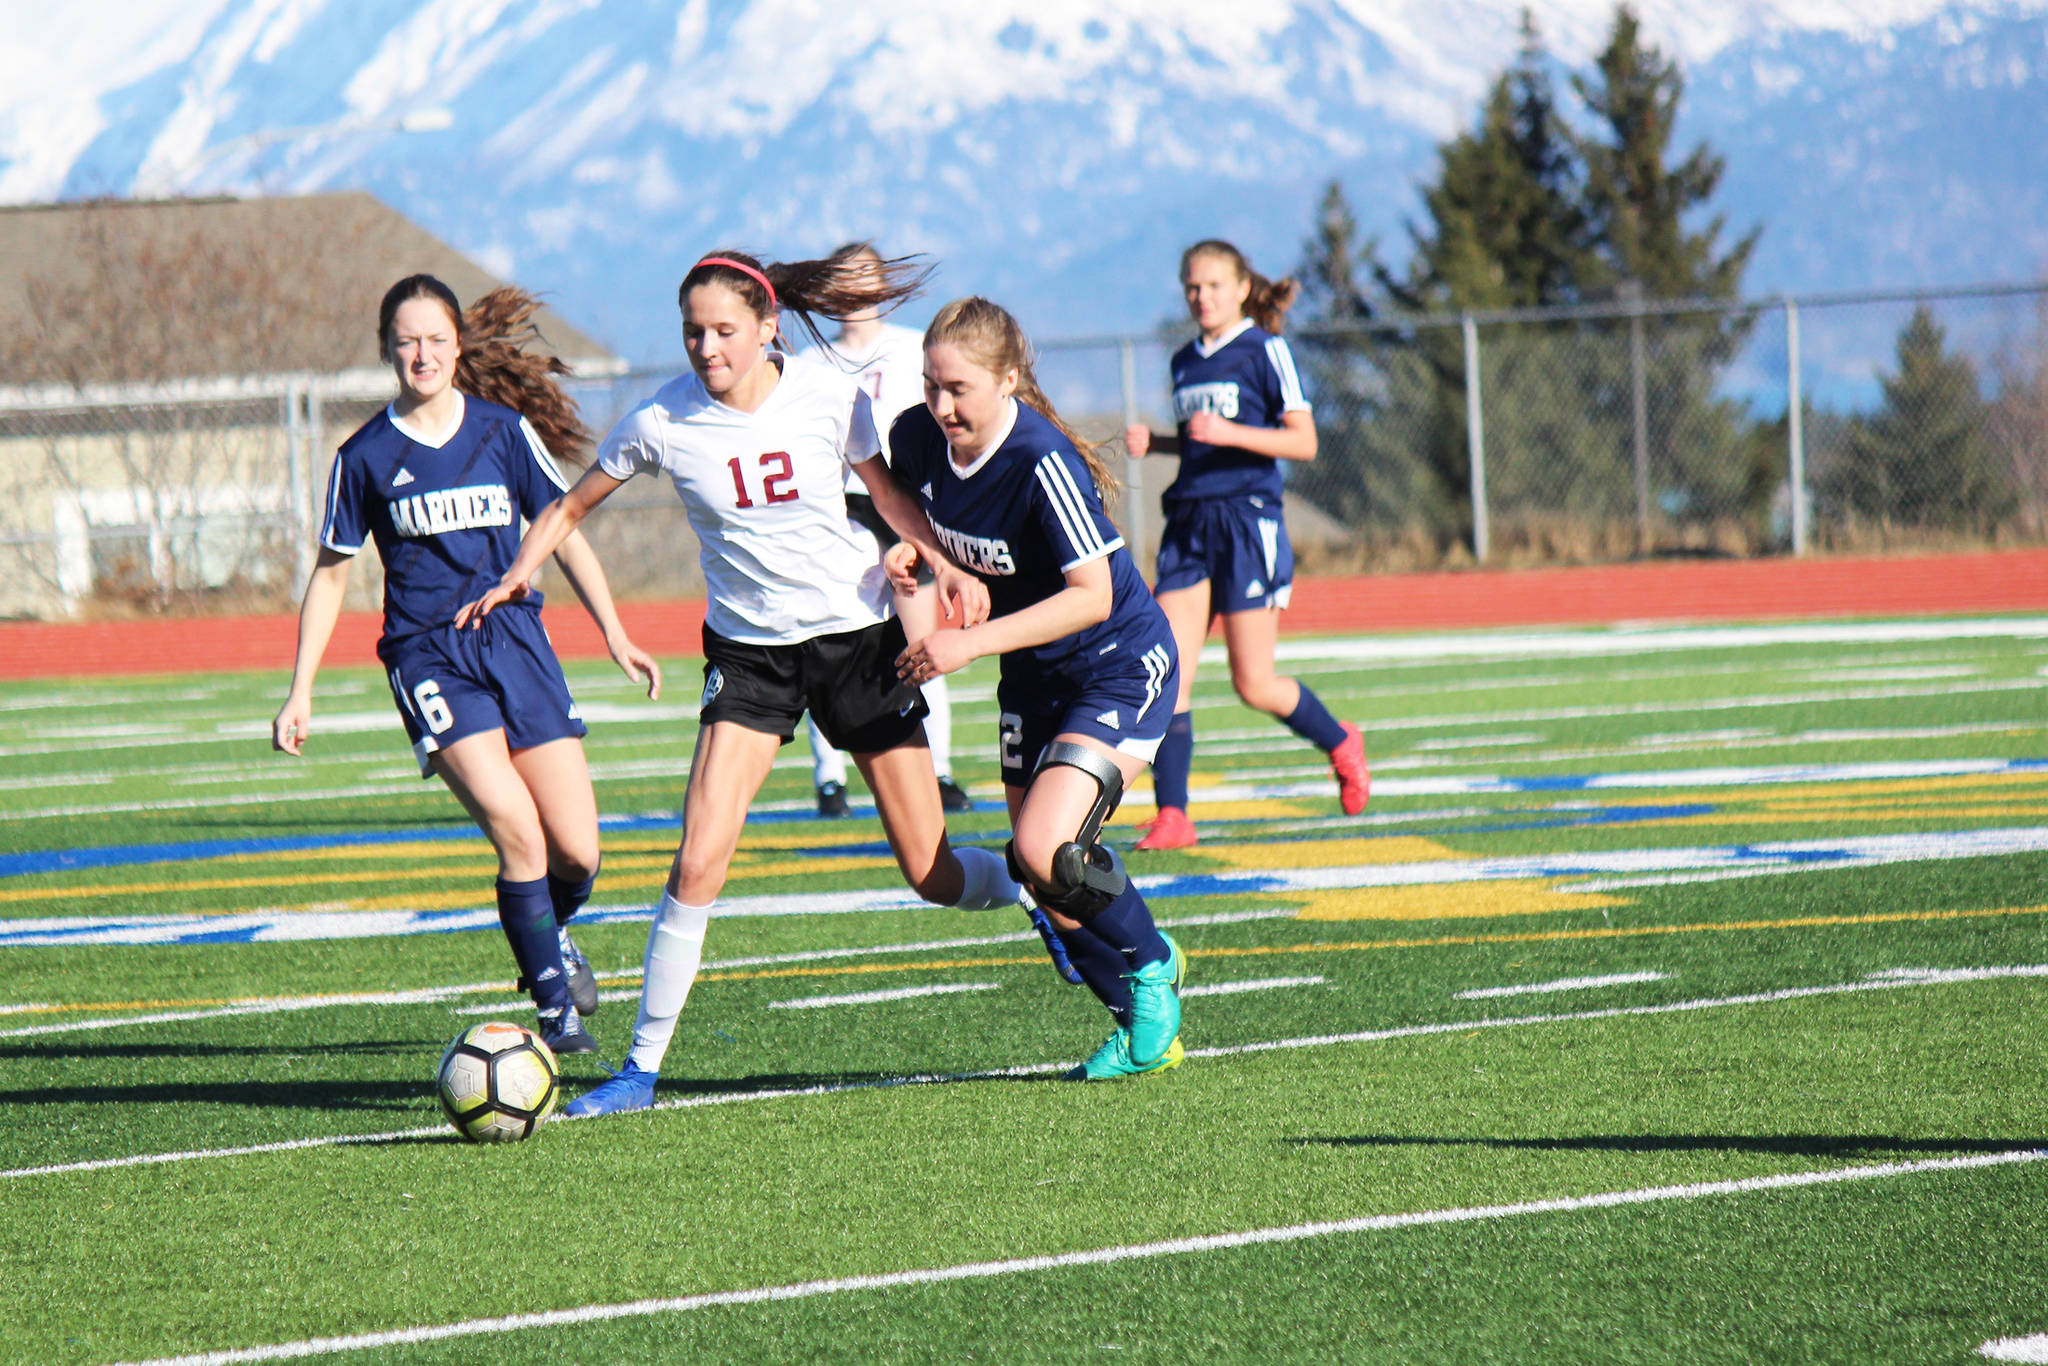 Mariners Eve Brau, left, and Brenna McCarron, right, edge a Grace Christian player out of the action during Friday’s varsity soccer game on April 26, 2019, at the high school in Homer, Alaska. (Photo by McKibben Jackinsky).